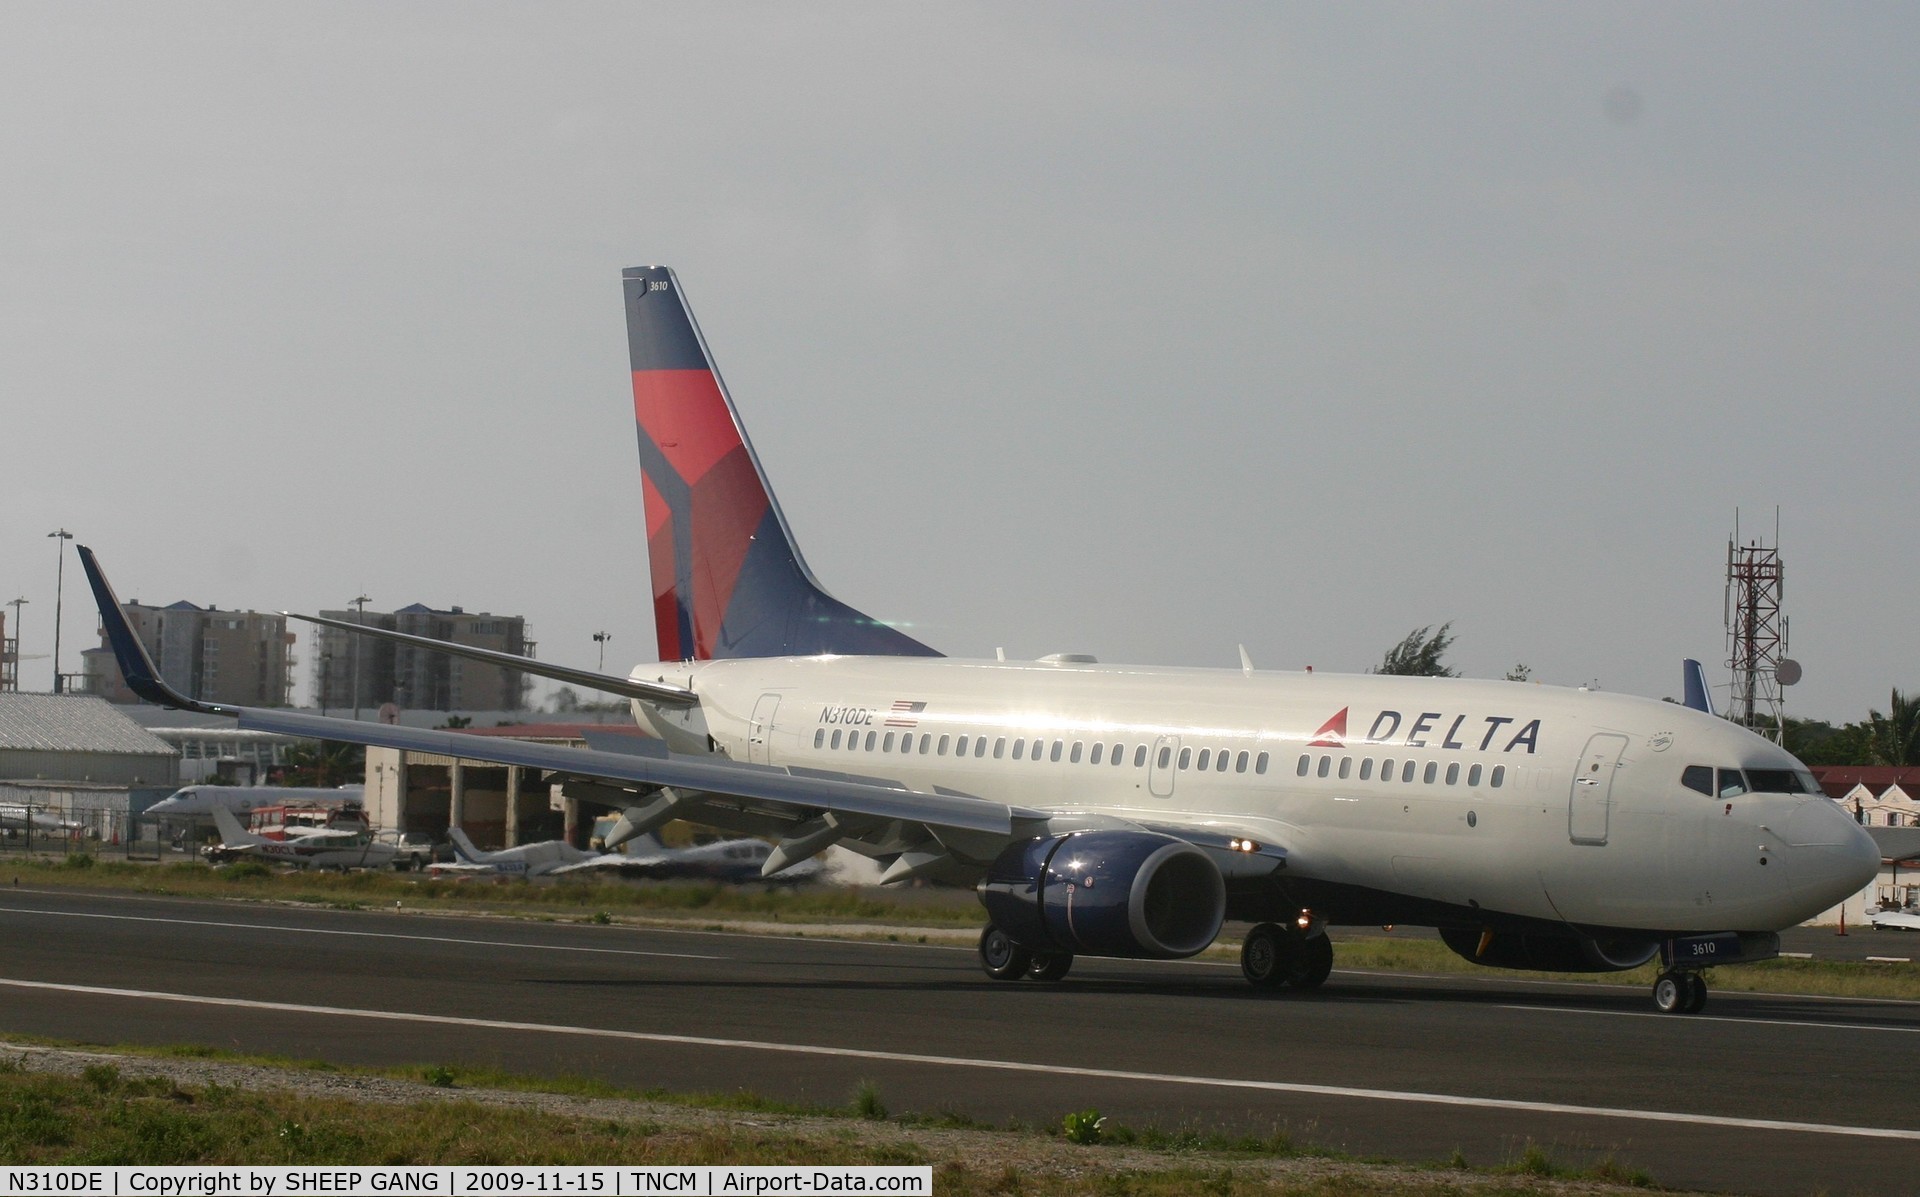 N310DE, Boeing 737-732 C/N 29665, delta just landed with full stopping power in use